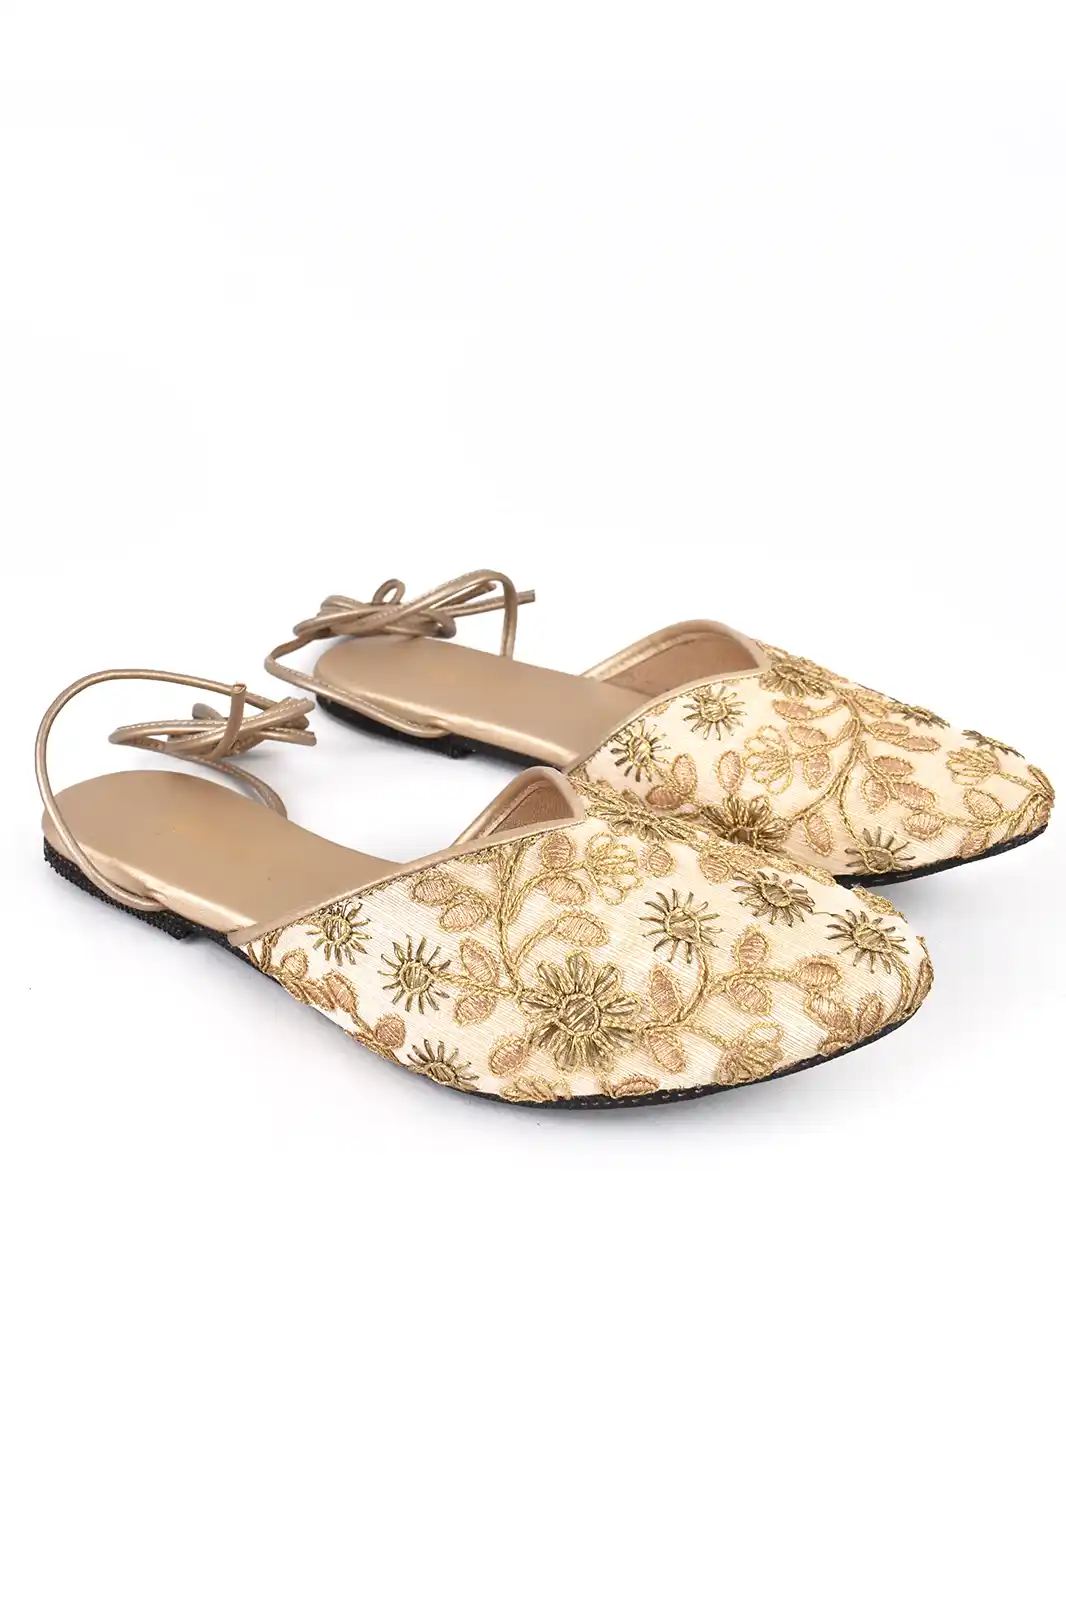 Paaduks Saba Gold Mules Embroidered, womens heels footwears, womens heels sandals, women's heels sandals, high heels sandals, women's heels footwear, flipkart women's footwear heels, high heels wedding sandals, womens sandals heels, women's heel sandals, women's shoe brands, womens sandals crocs, women's shoes online, women's footwear flats, white womens sandals, womens shoes amazon, womens sandals comfort, womens sandals flipkart, women's trending shoes, women's sandals brands, womens footwear online, organic footwear, vegan footwear india, vegan shoes in india, vegan shoes india, best brand for women's sandals in india, best women's sandals brands, eco friendly footwear brands in india, vegan shoes brands in india